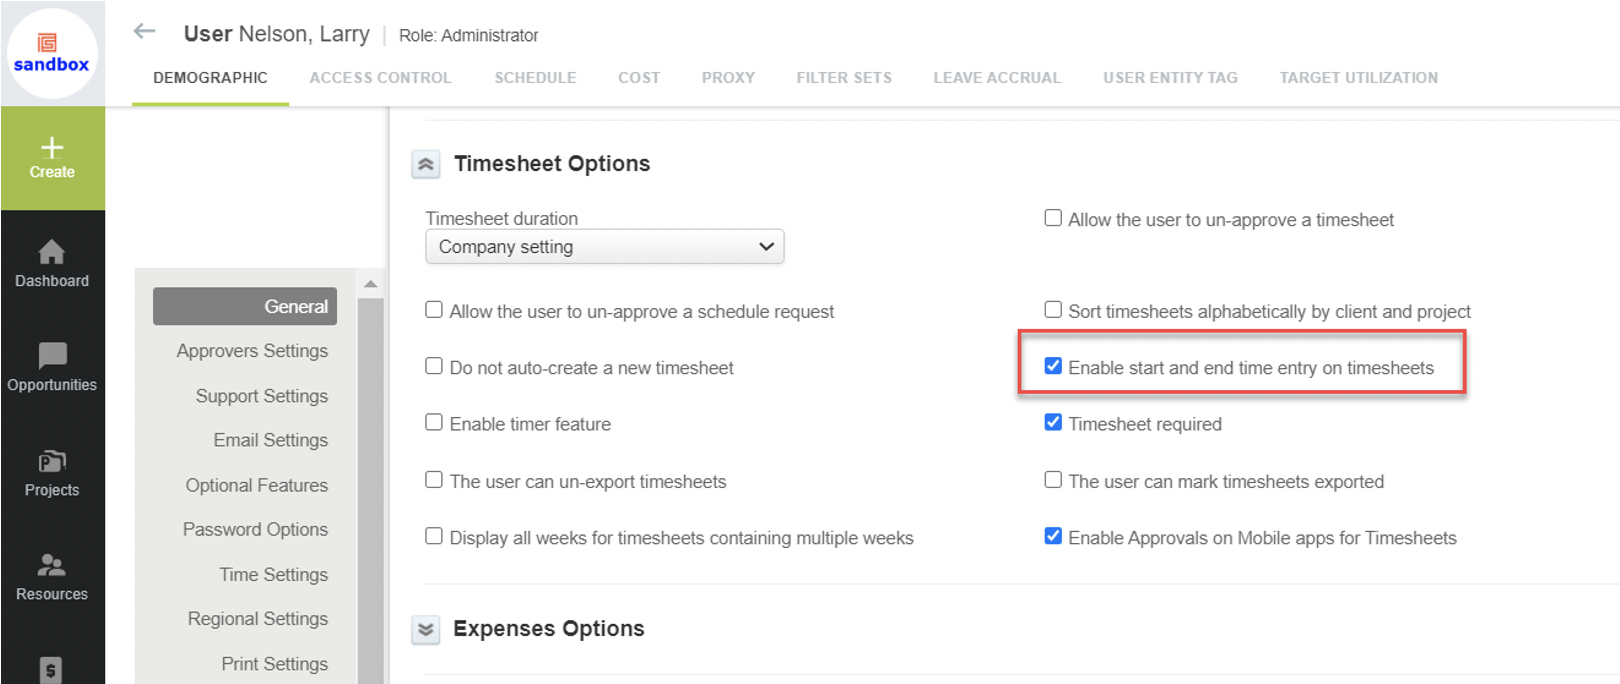 checking the box to enable start and end time entry on timesheets in the timesheet options 